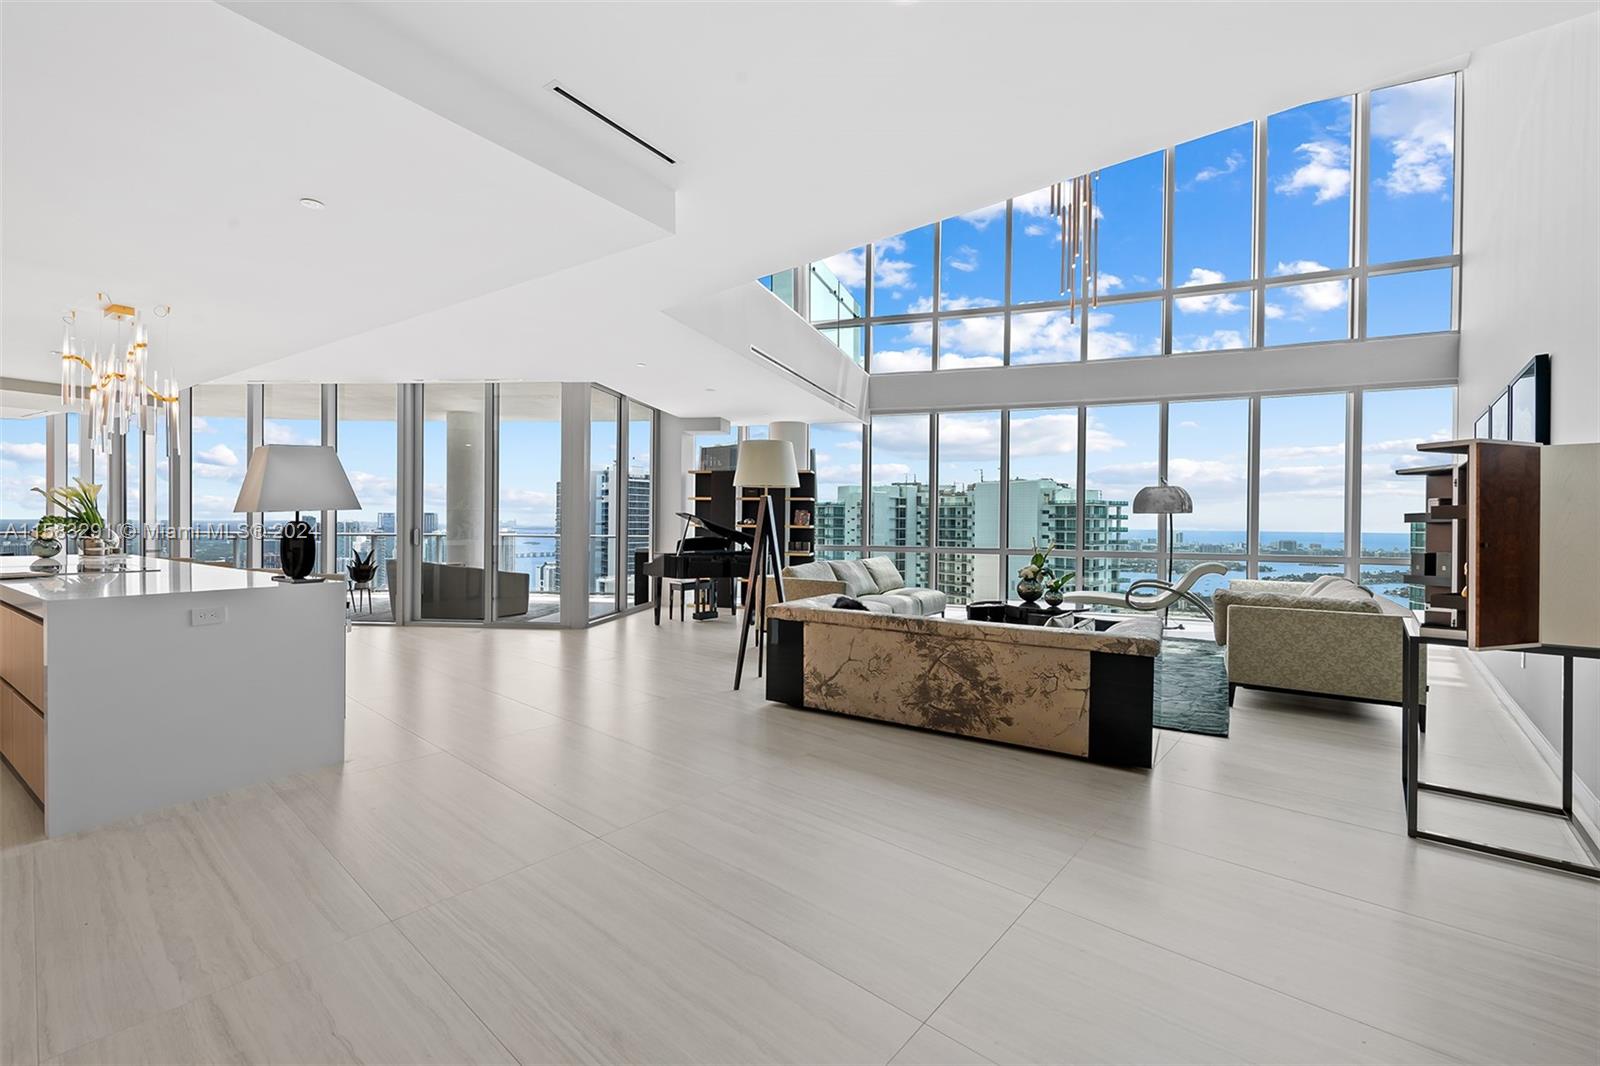 Located within Miami Worldcenter, the second largest master planned community in the U.S., PARAMOUNT Miami Worldcenter, the building with the most amenities in the world. This 6,513sq ft. (unfurnished) 5BD + Den + Office / 6.5Bath DUPLEX is AVAILABLE NOW, a must see!! Access to 46 different amenities such as 5 pools, spa, outdoor lounge, summer kitchen, game room, state of the art fitness center, boxing studio, basketball court, racquetball, yoga, observatory, jam room and recording studio and much more. Just steps from the Brightline Train Station, Port of MIA, Arena and minutes to MIA Airport, Wynwood, Miami Beach and so much more.**Furniture and art is not included in the price.